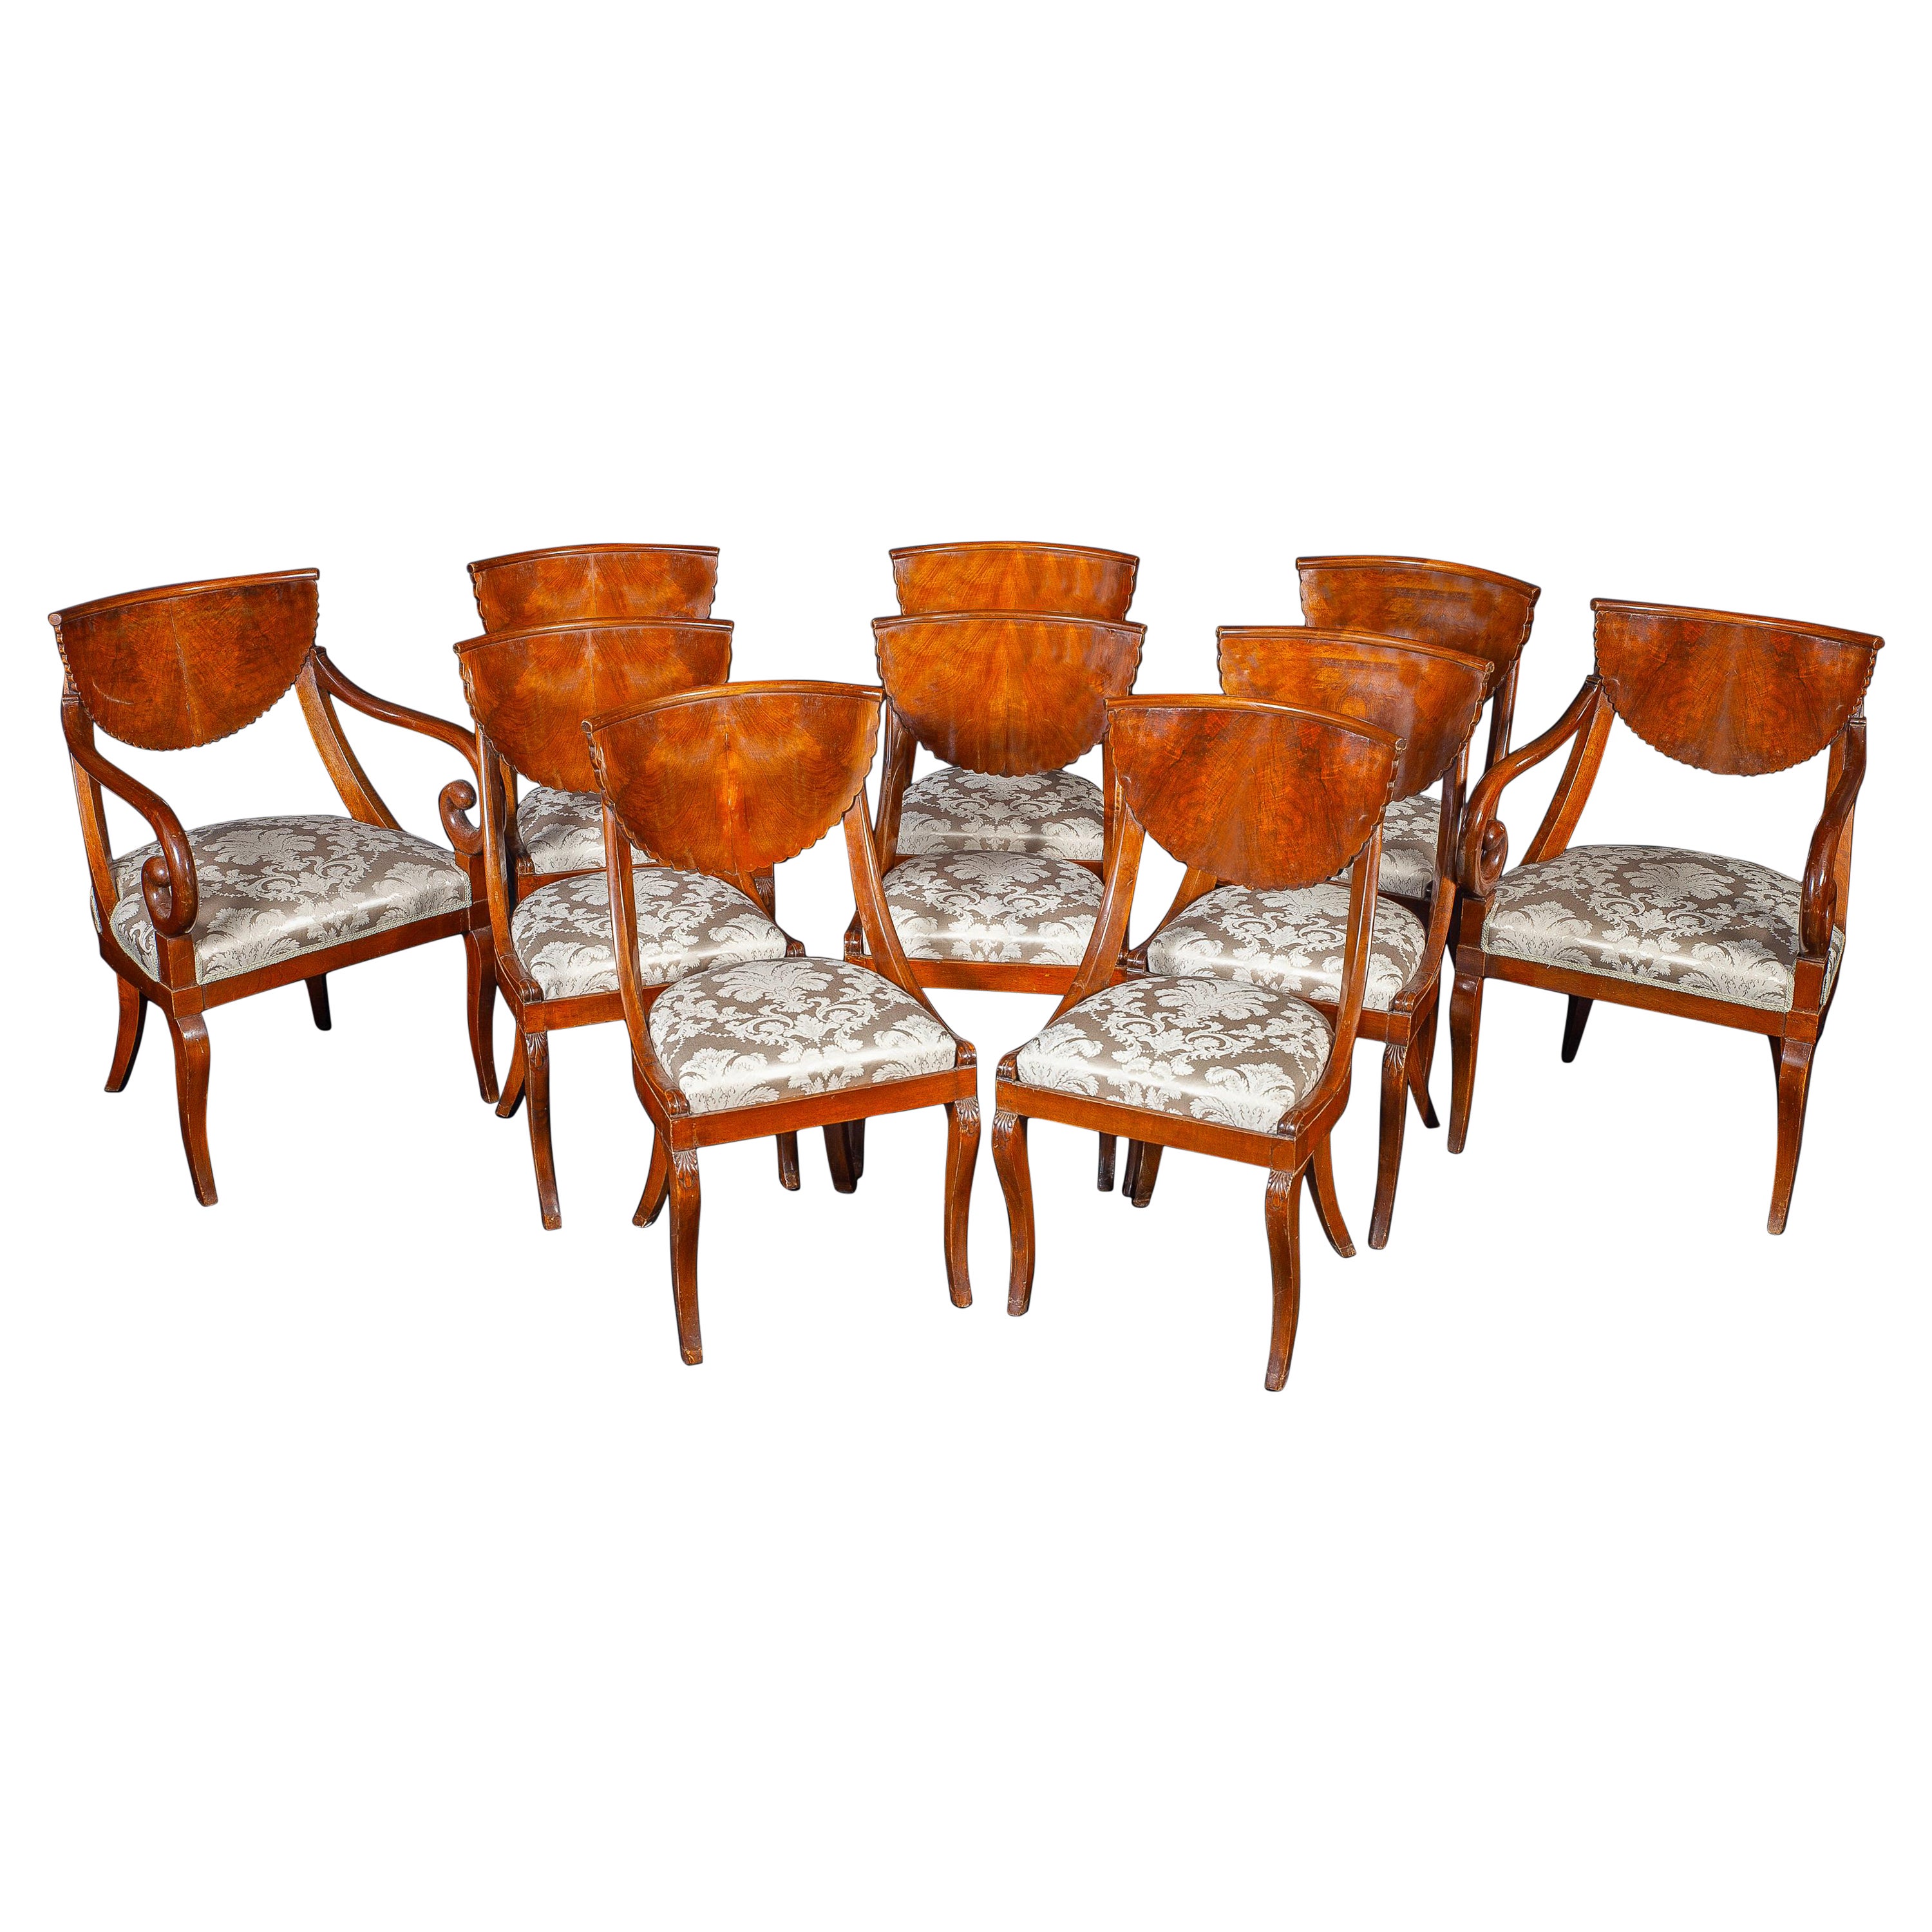 Fine Italian Dining Room Set of Eight Chairs and a Pair of Armchairs, 1790